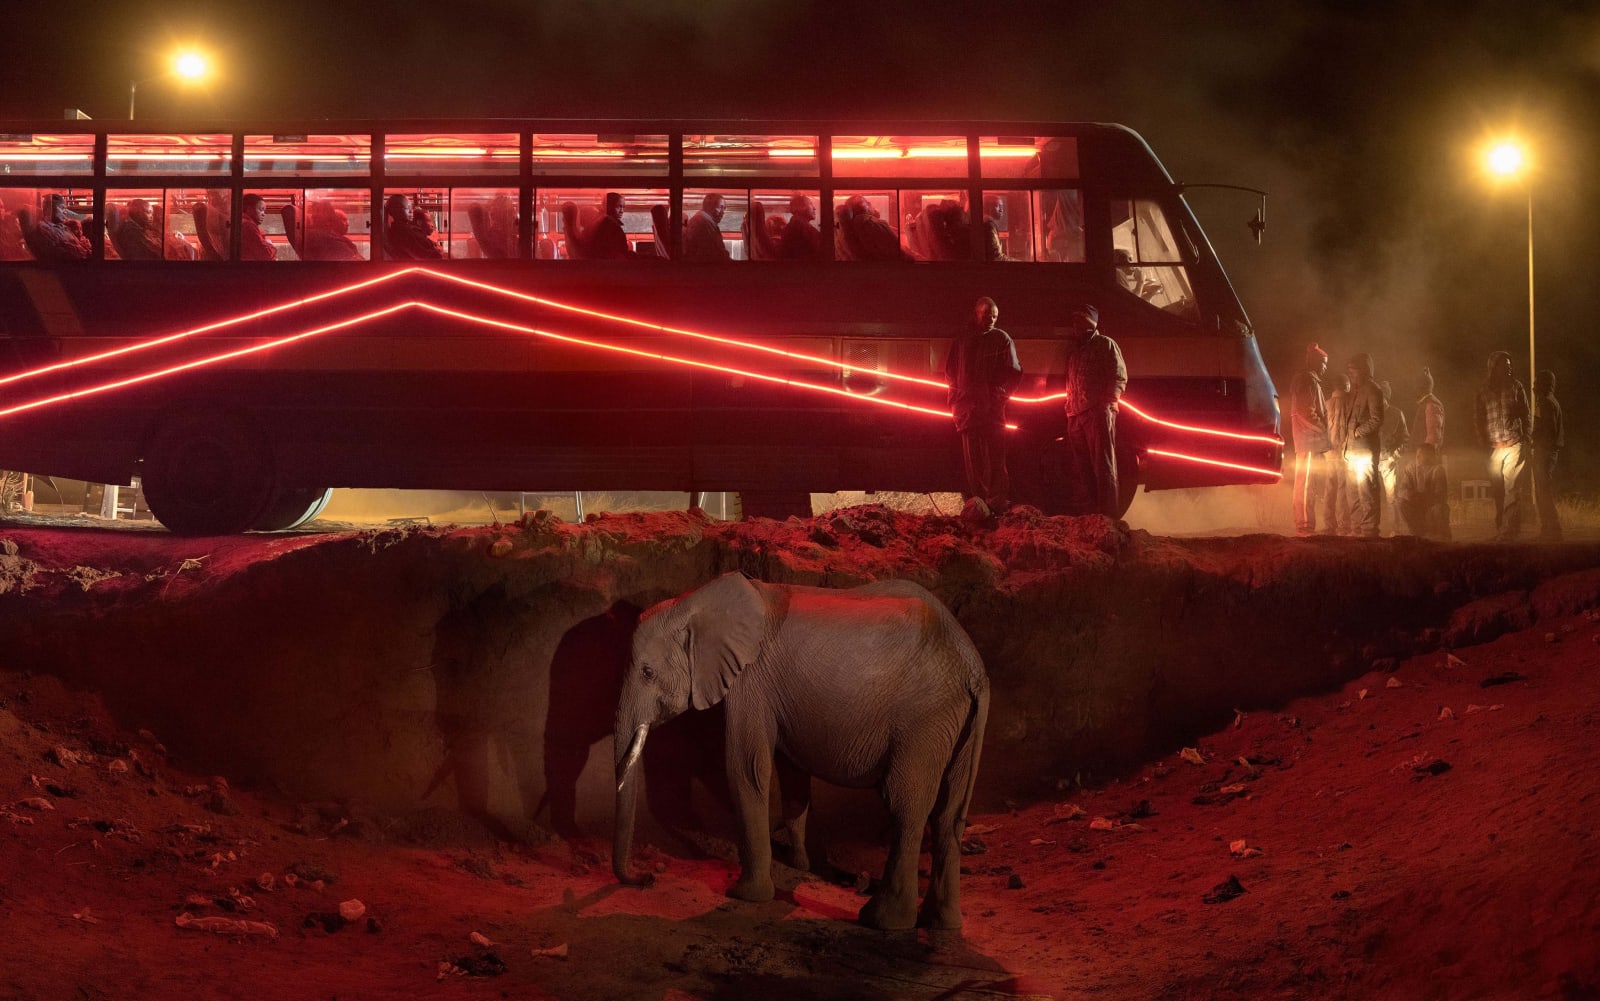 Nick Brandt, Bus Station With Elephant & Red Bus, 2018